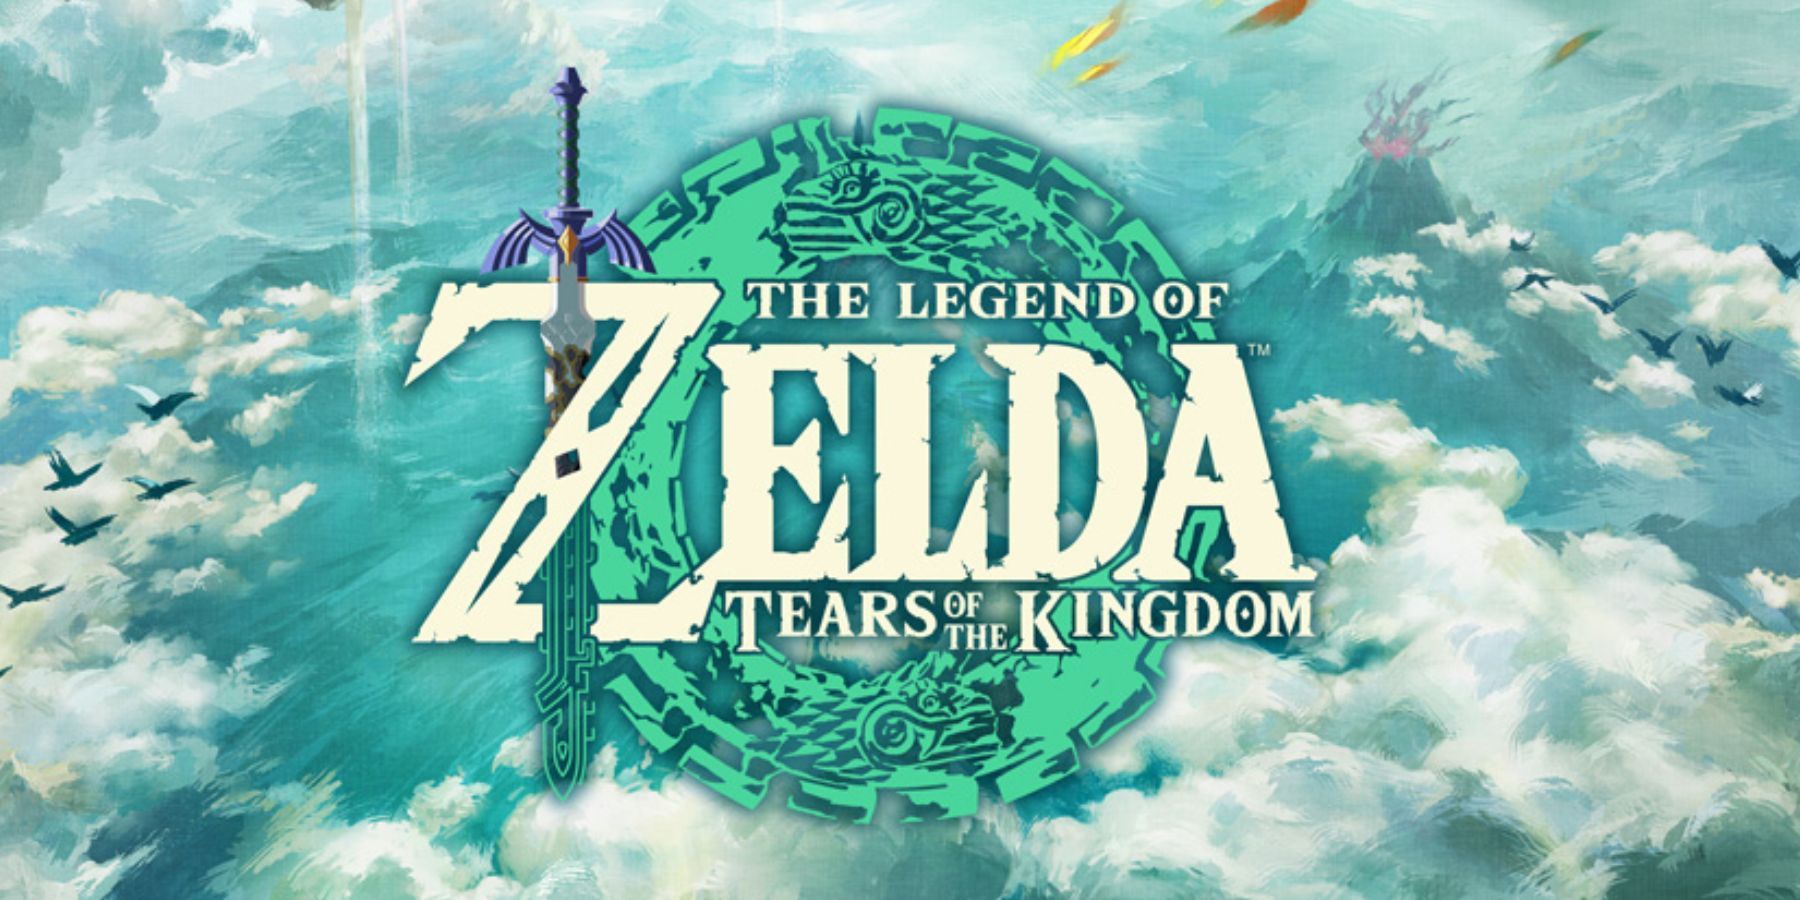 The Legend of Zelda: Tears of the Kingdom the New Equipment and Abilities Revealed for Link So Far